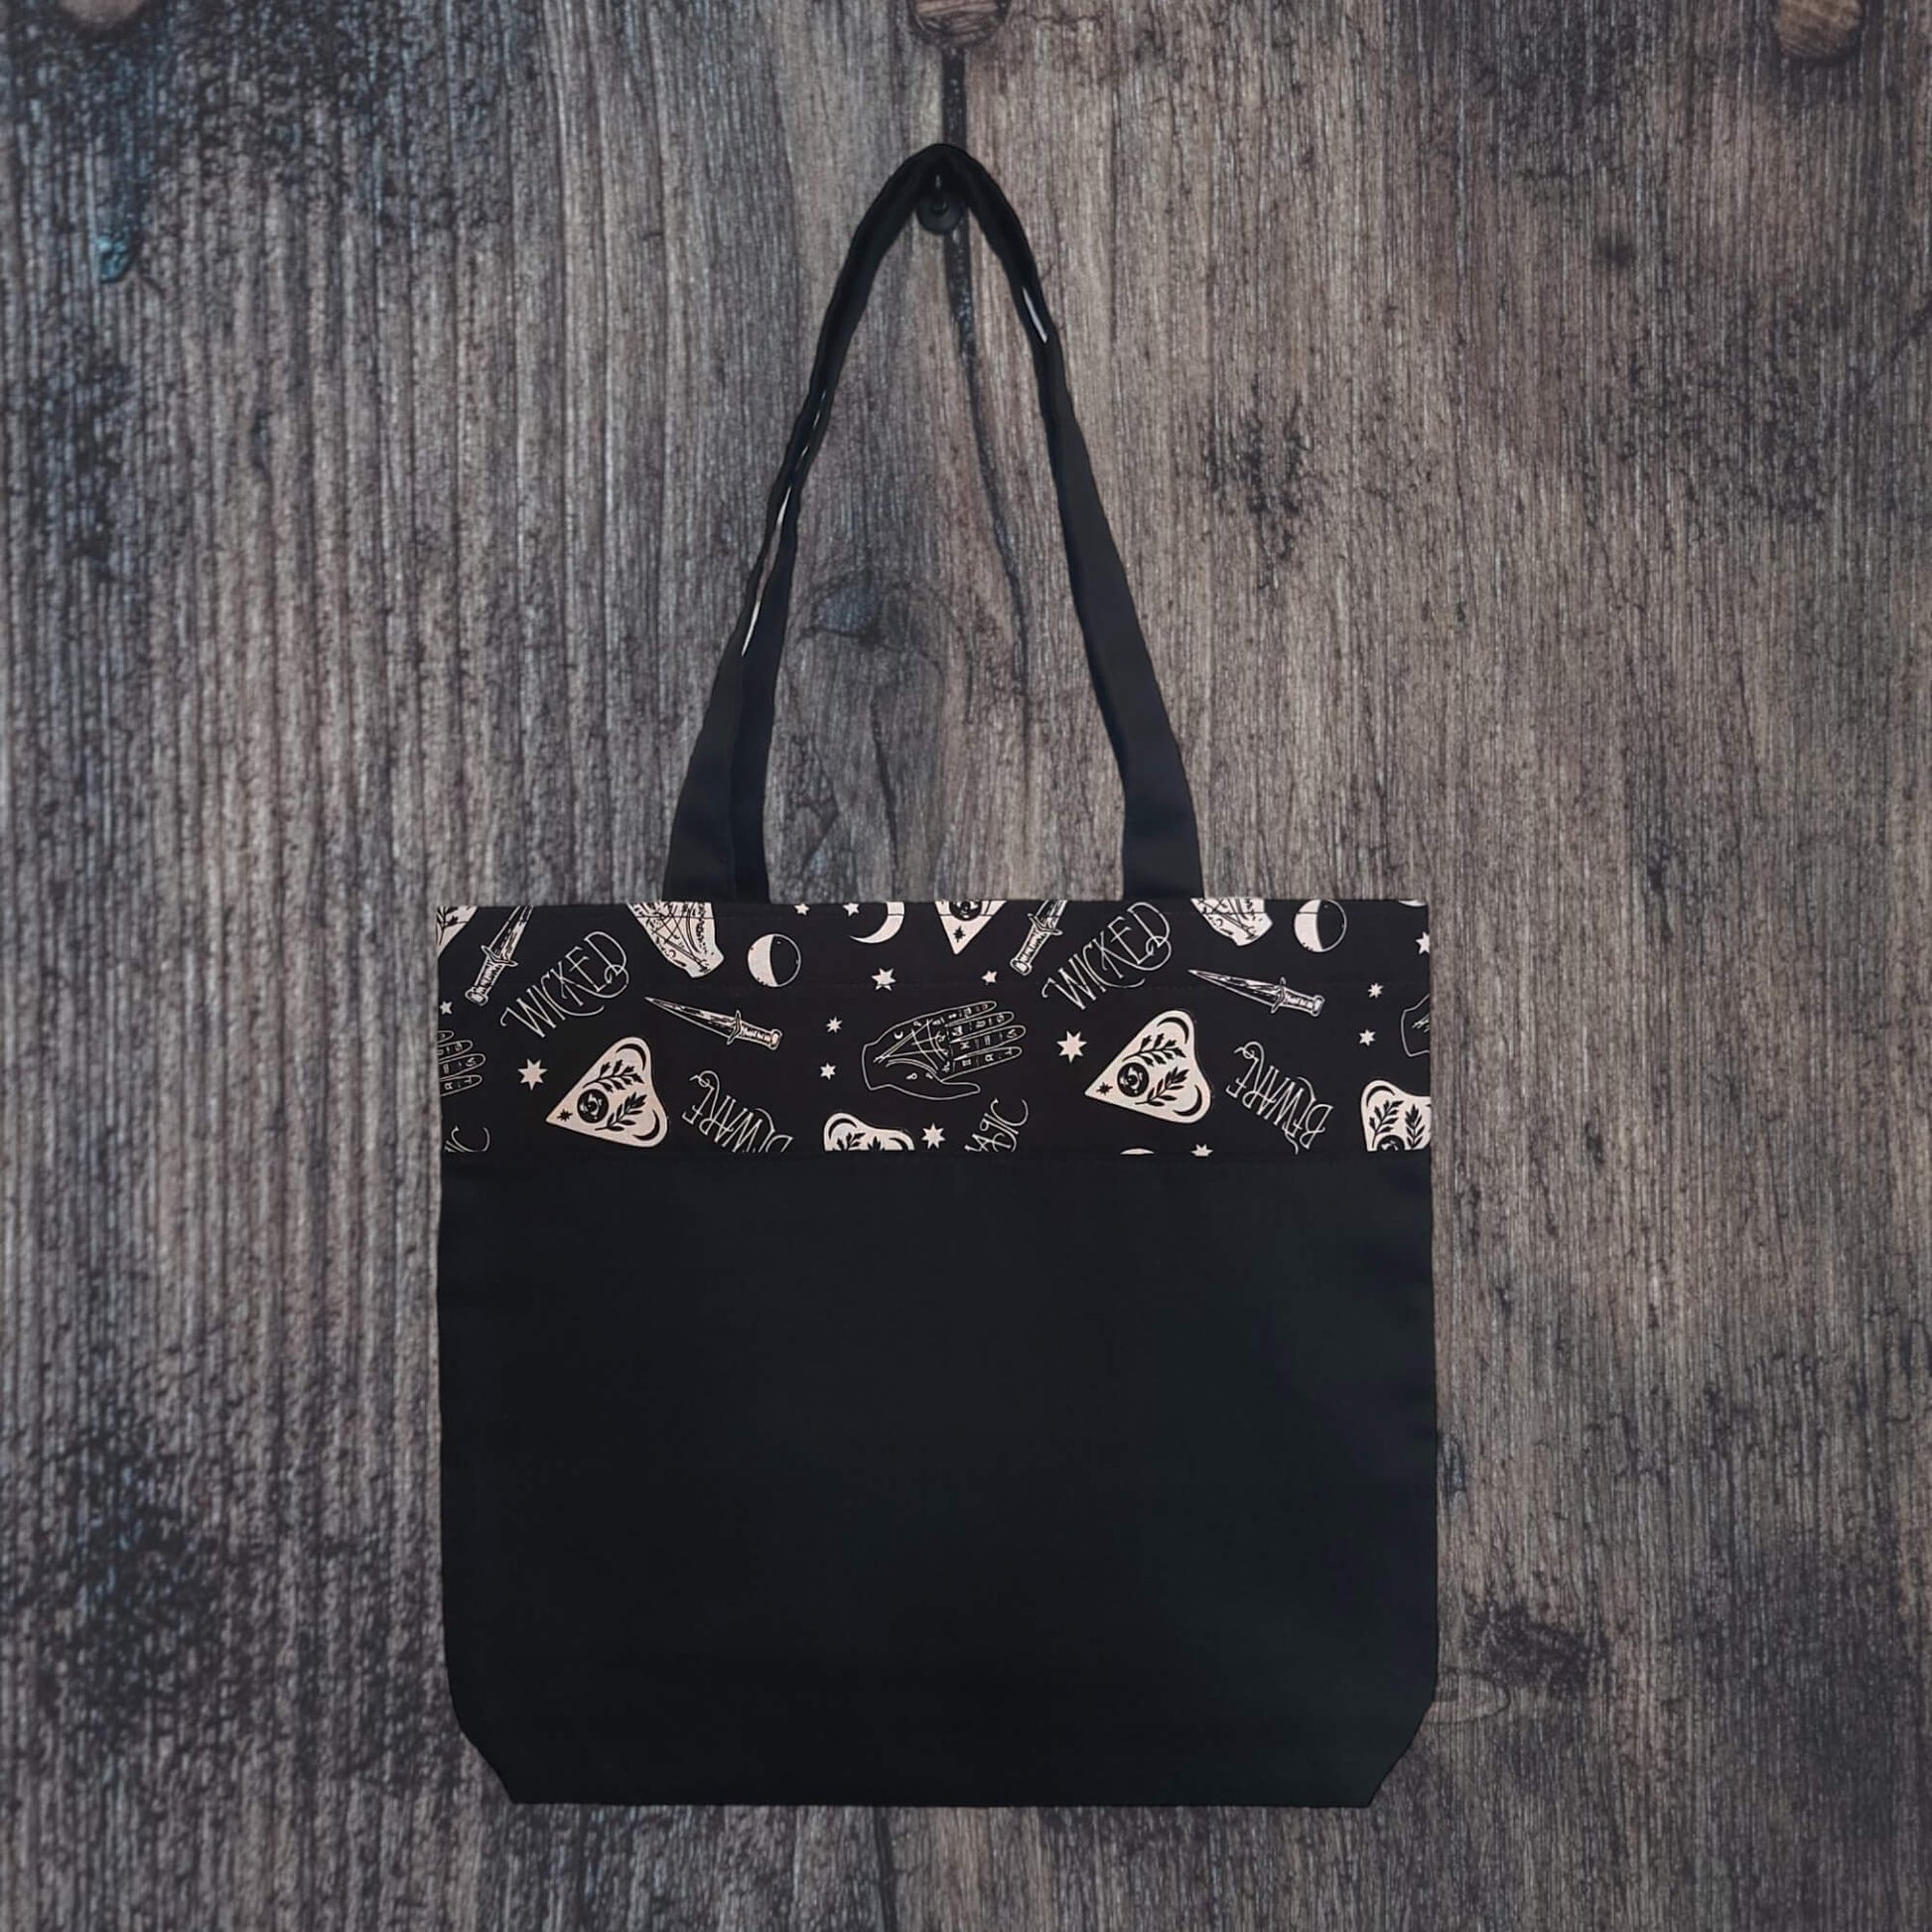 our accent tote bag featuring our Black Wicked Night pattern.